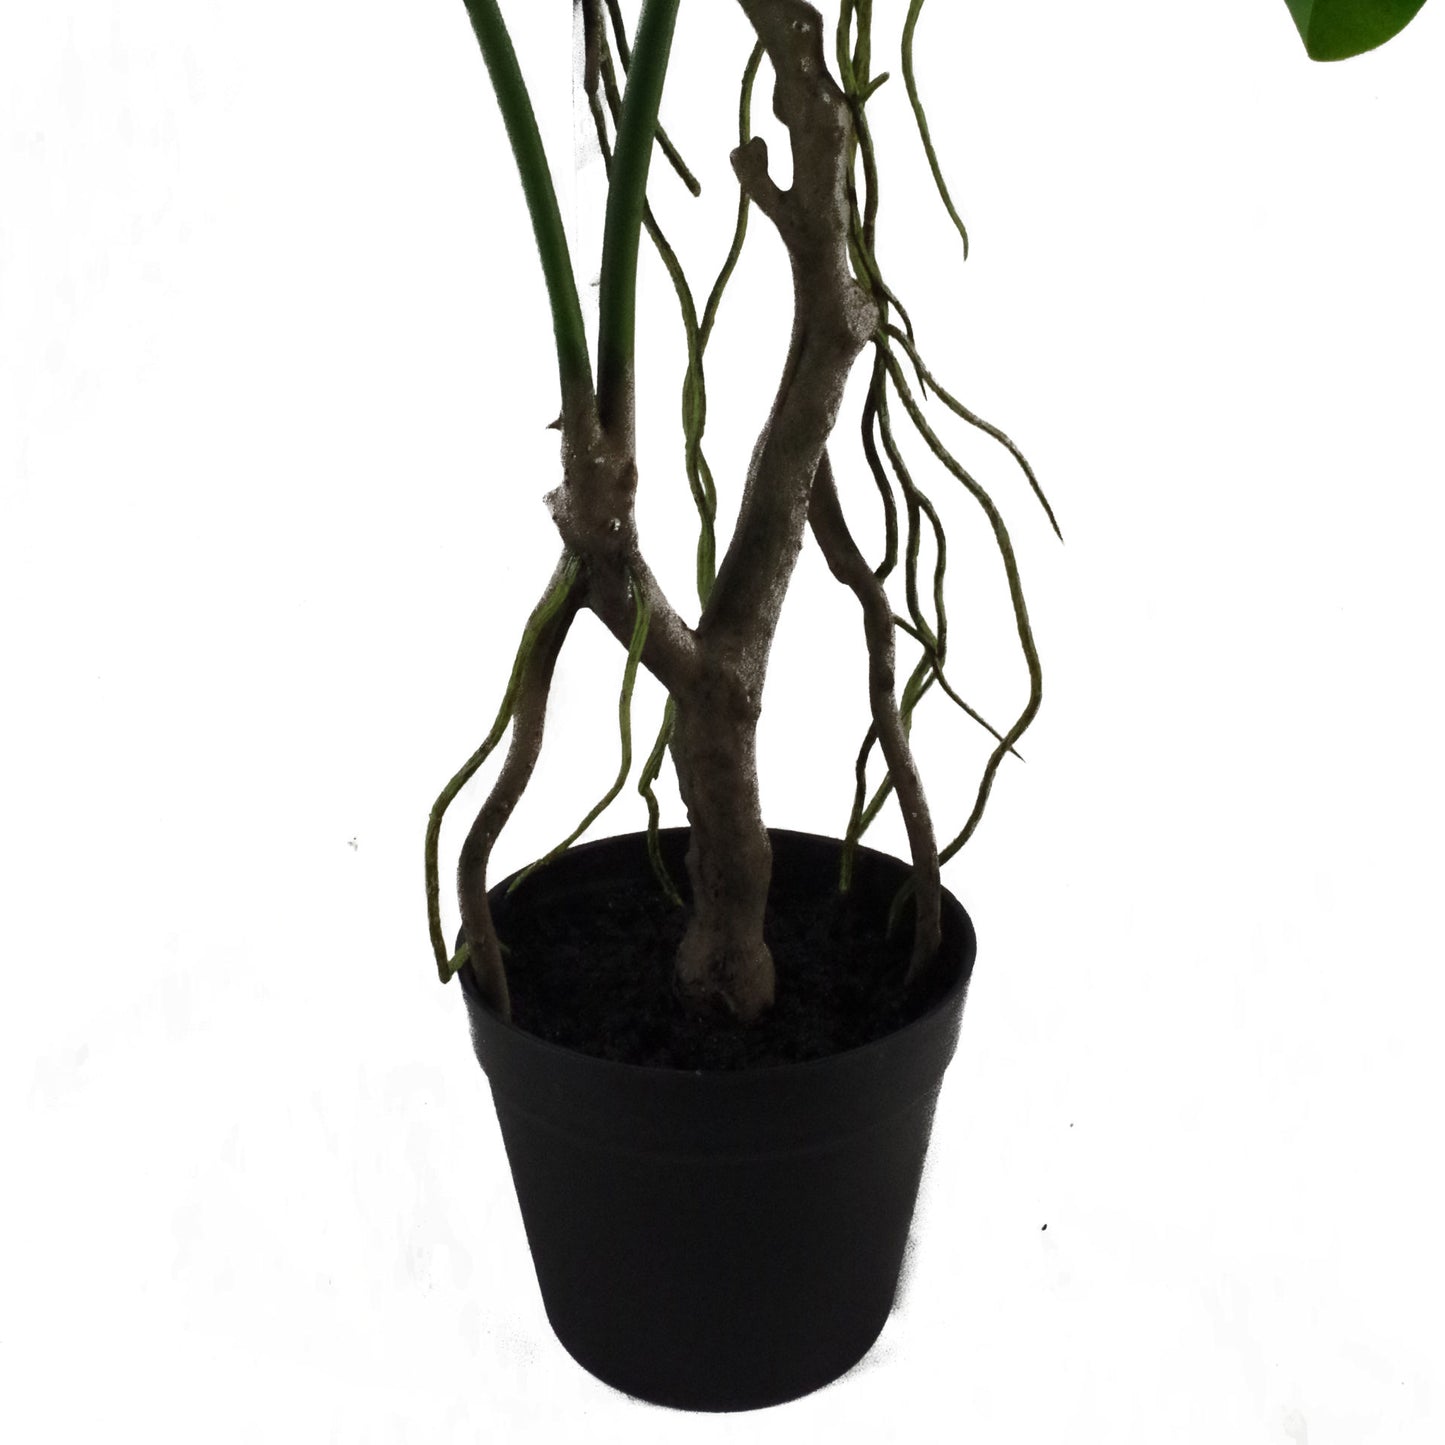 Artificial Twisted Stem Monstera Plant Pot and Stem Close Up